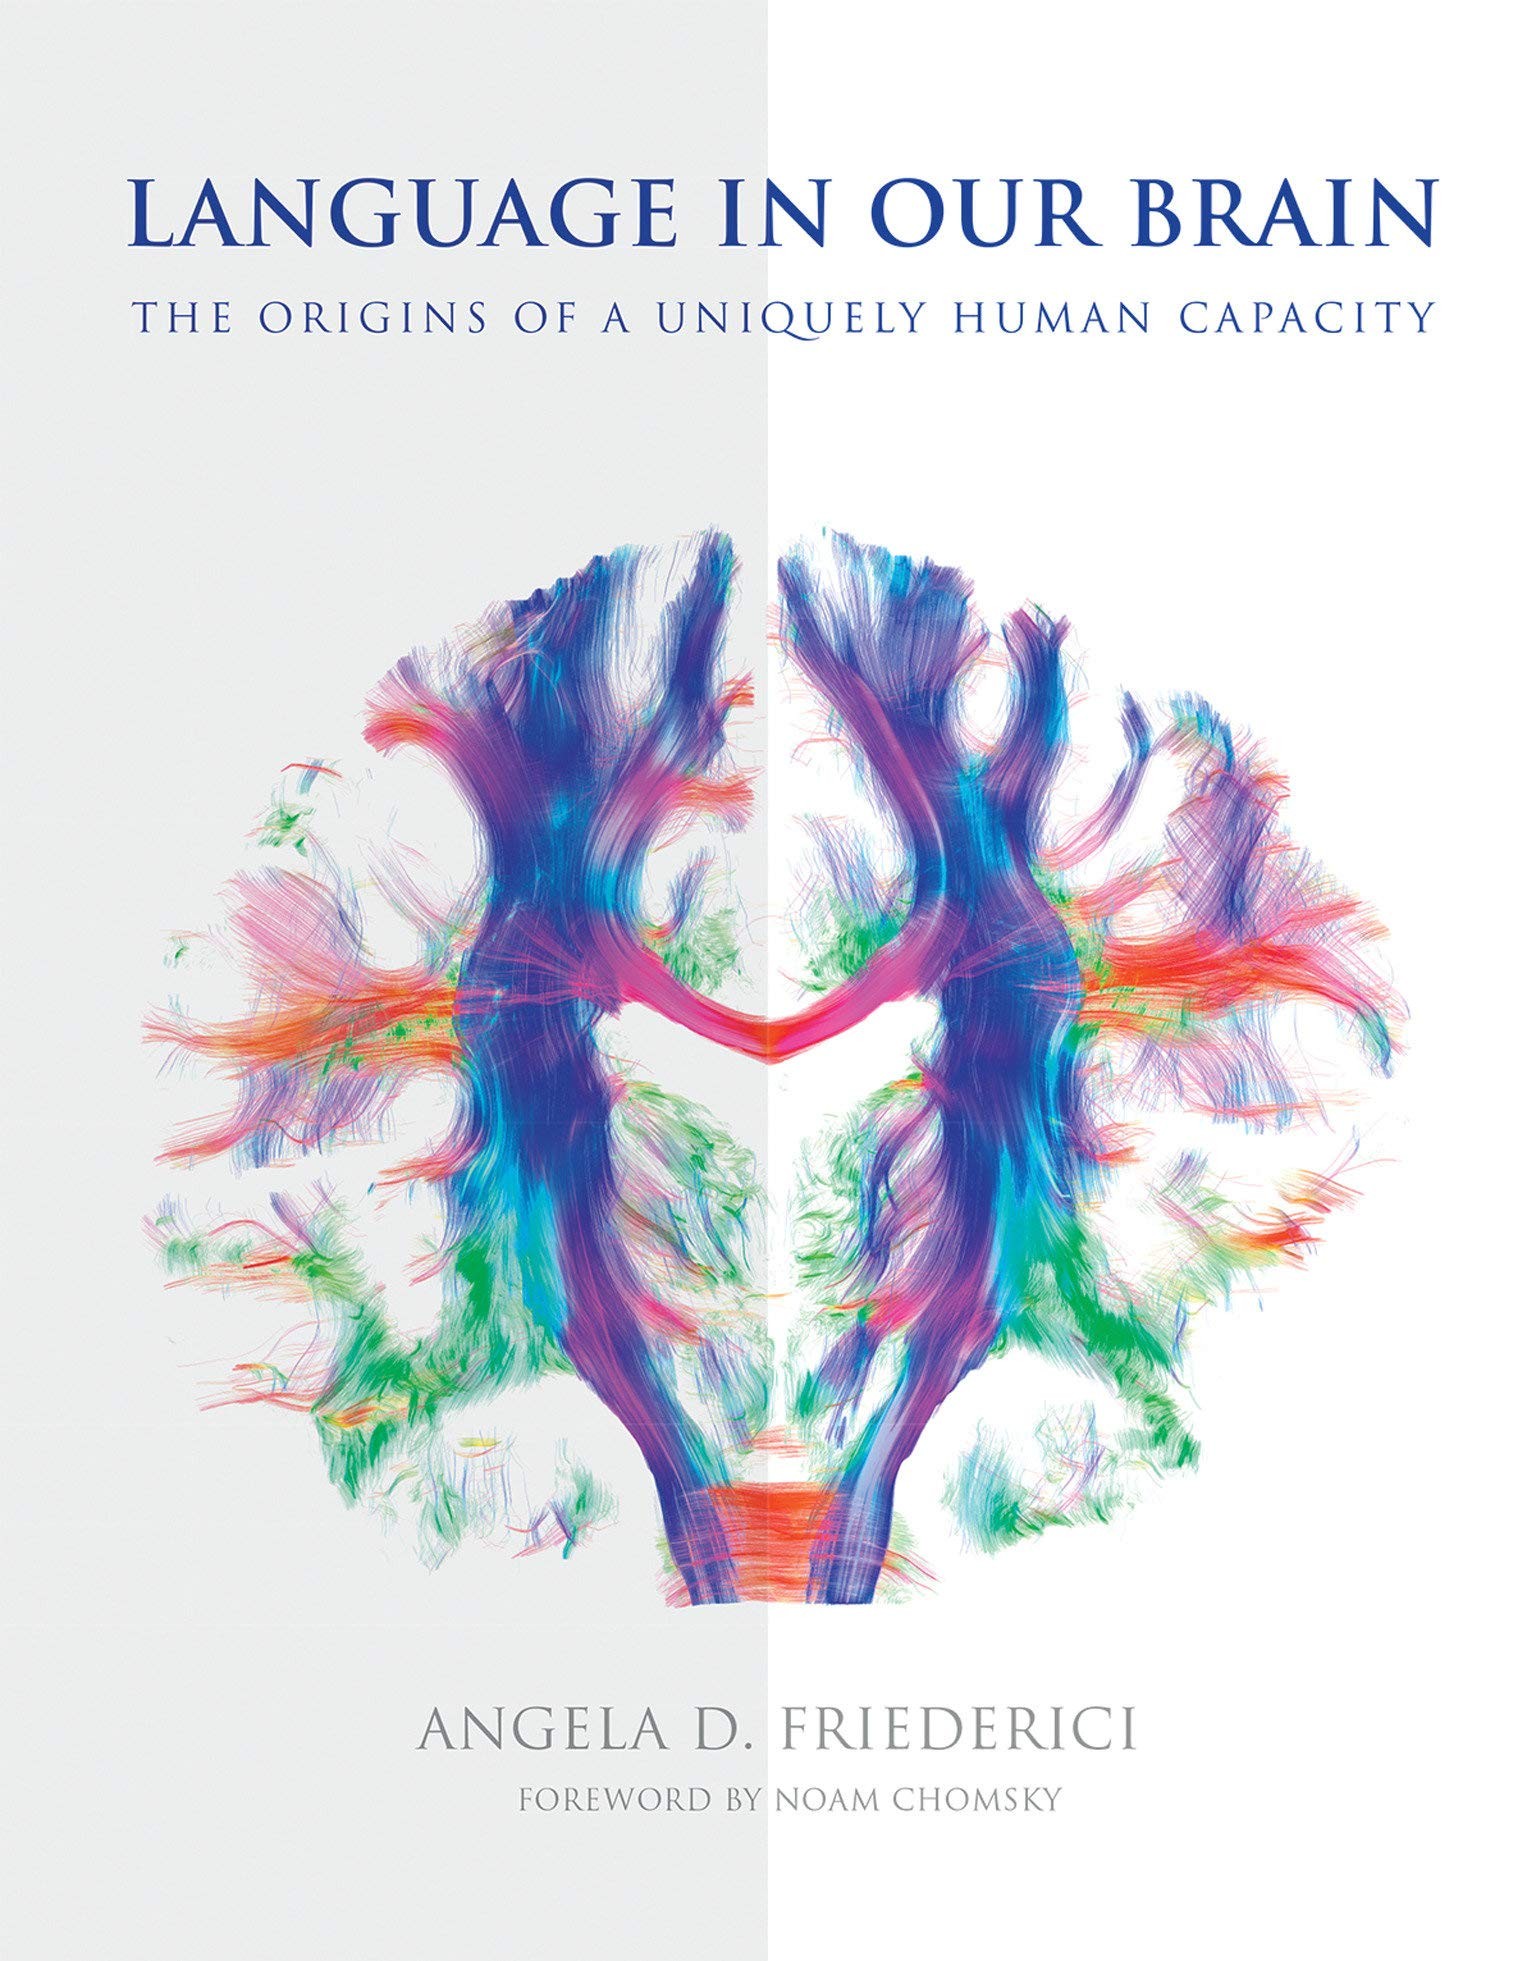 Language in Our Brain: The Origins of a Uniquely Human Capacity